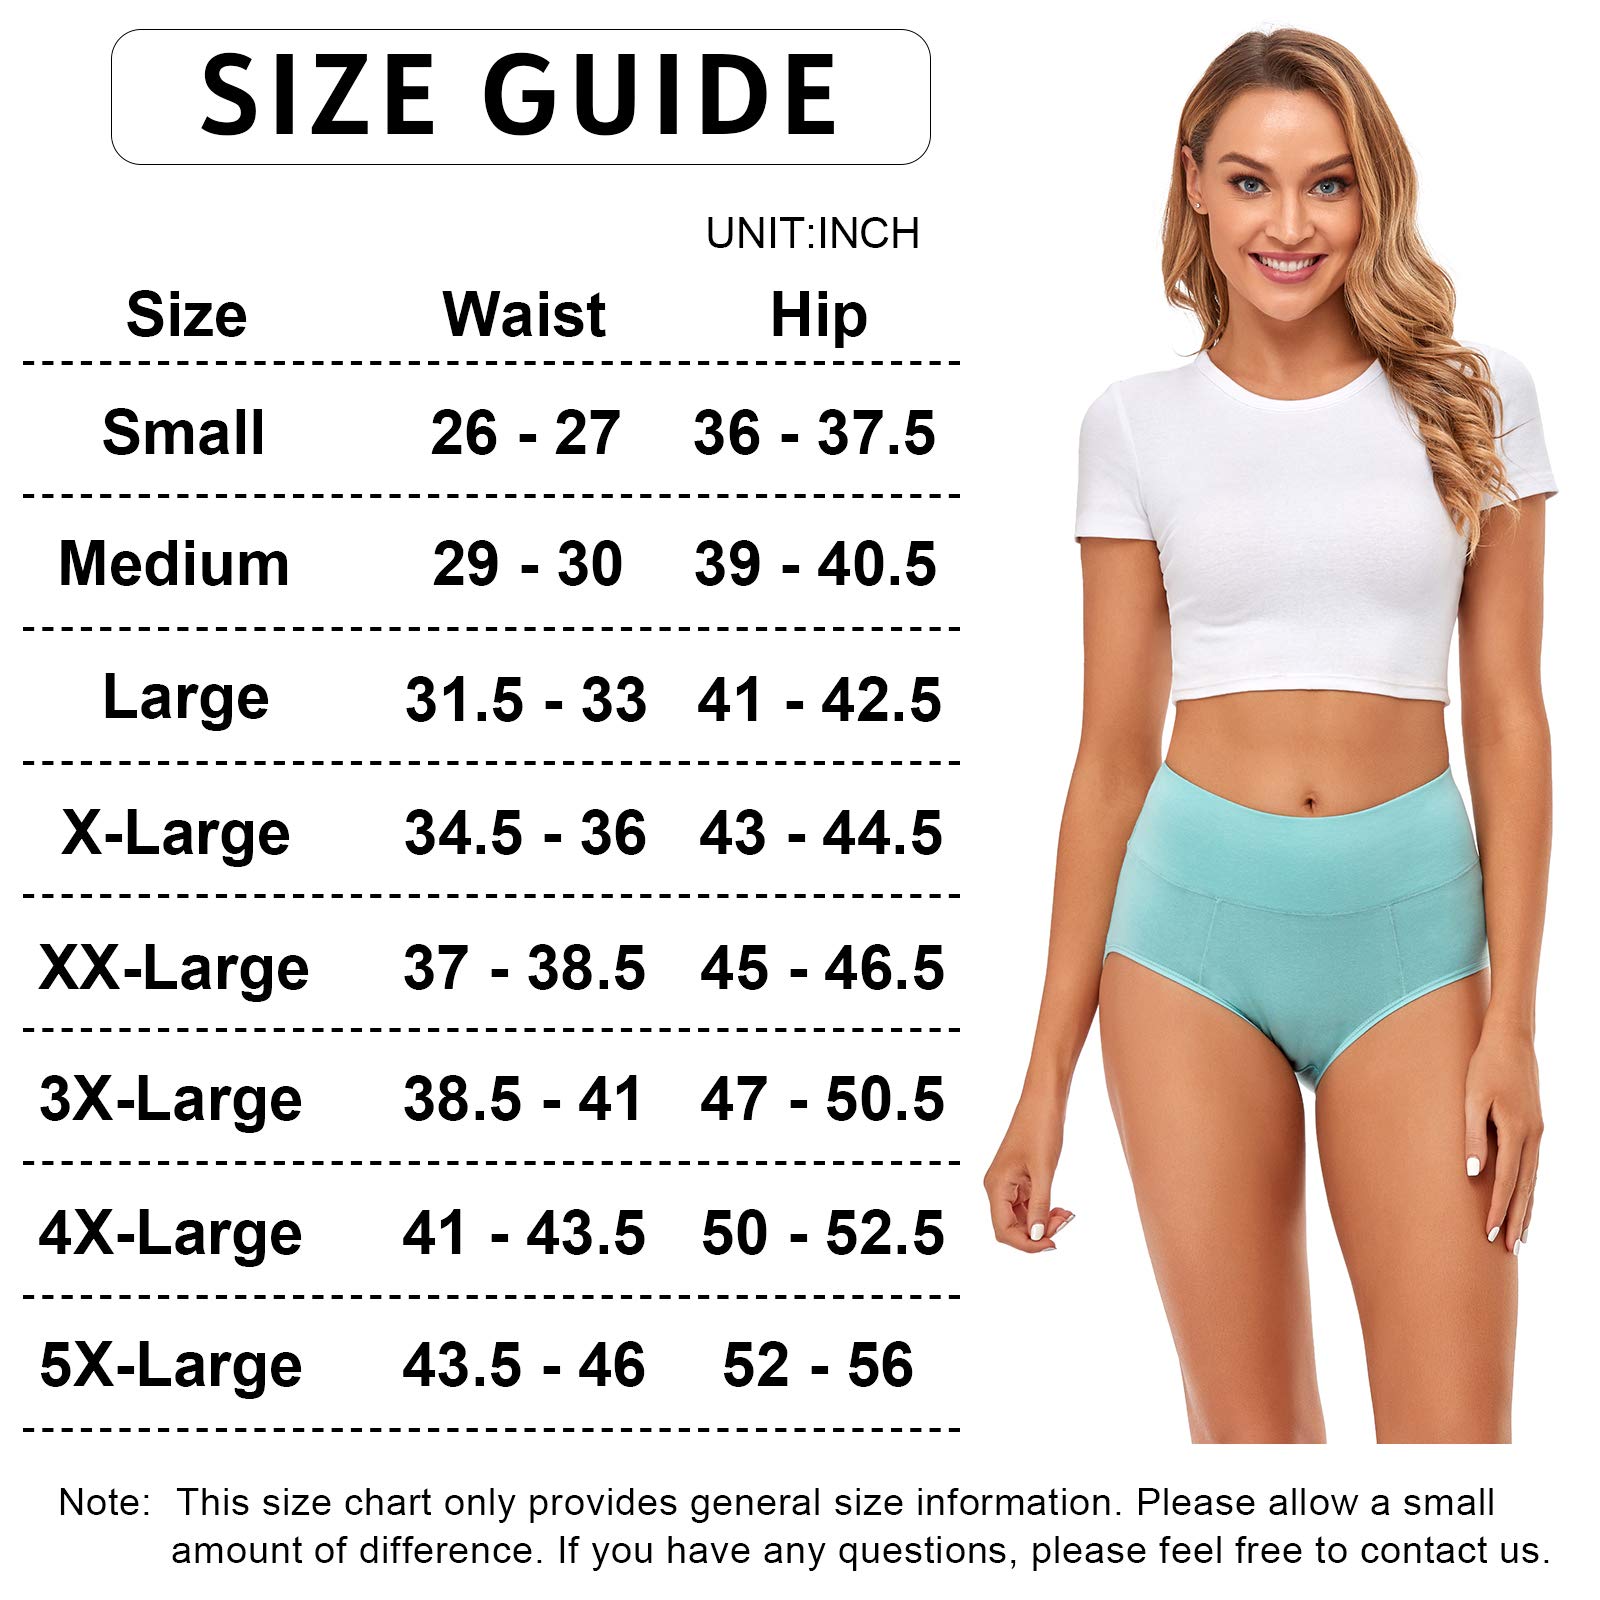 Buy ASIMOON Womens Underwear, Cotton Underwear No Muffin Top Full Briefs  Soft Stretch Breathable Ladies Panties for Women